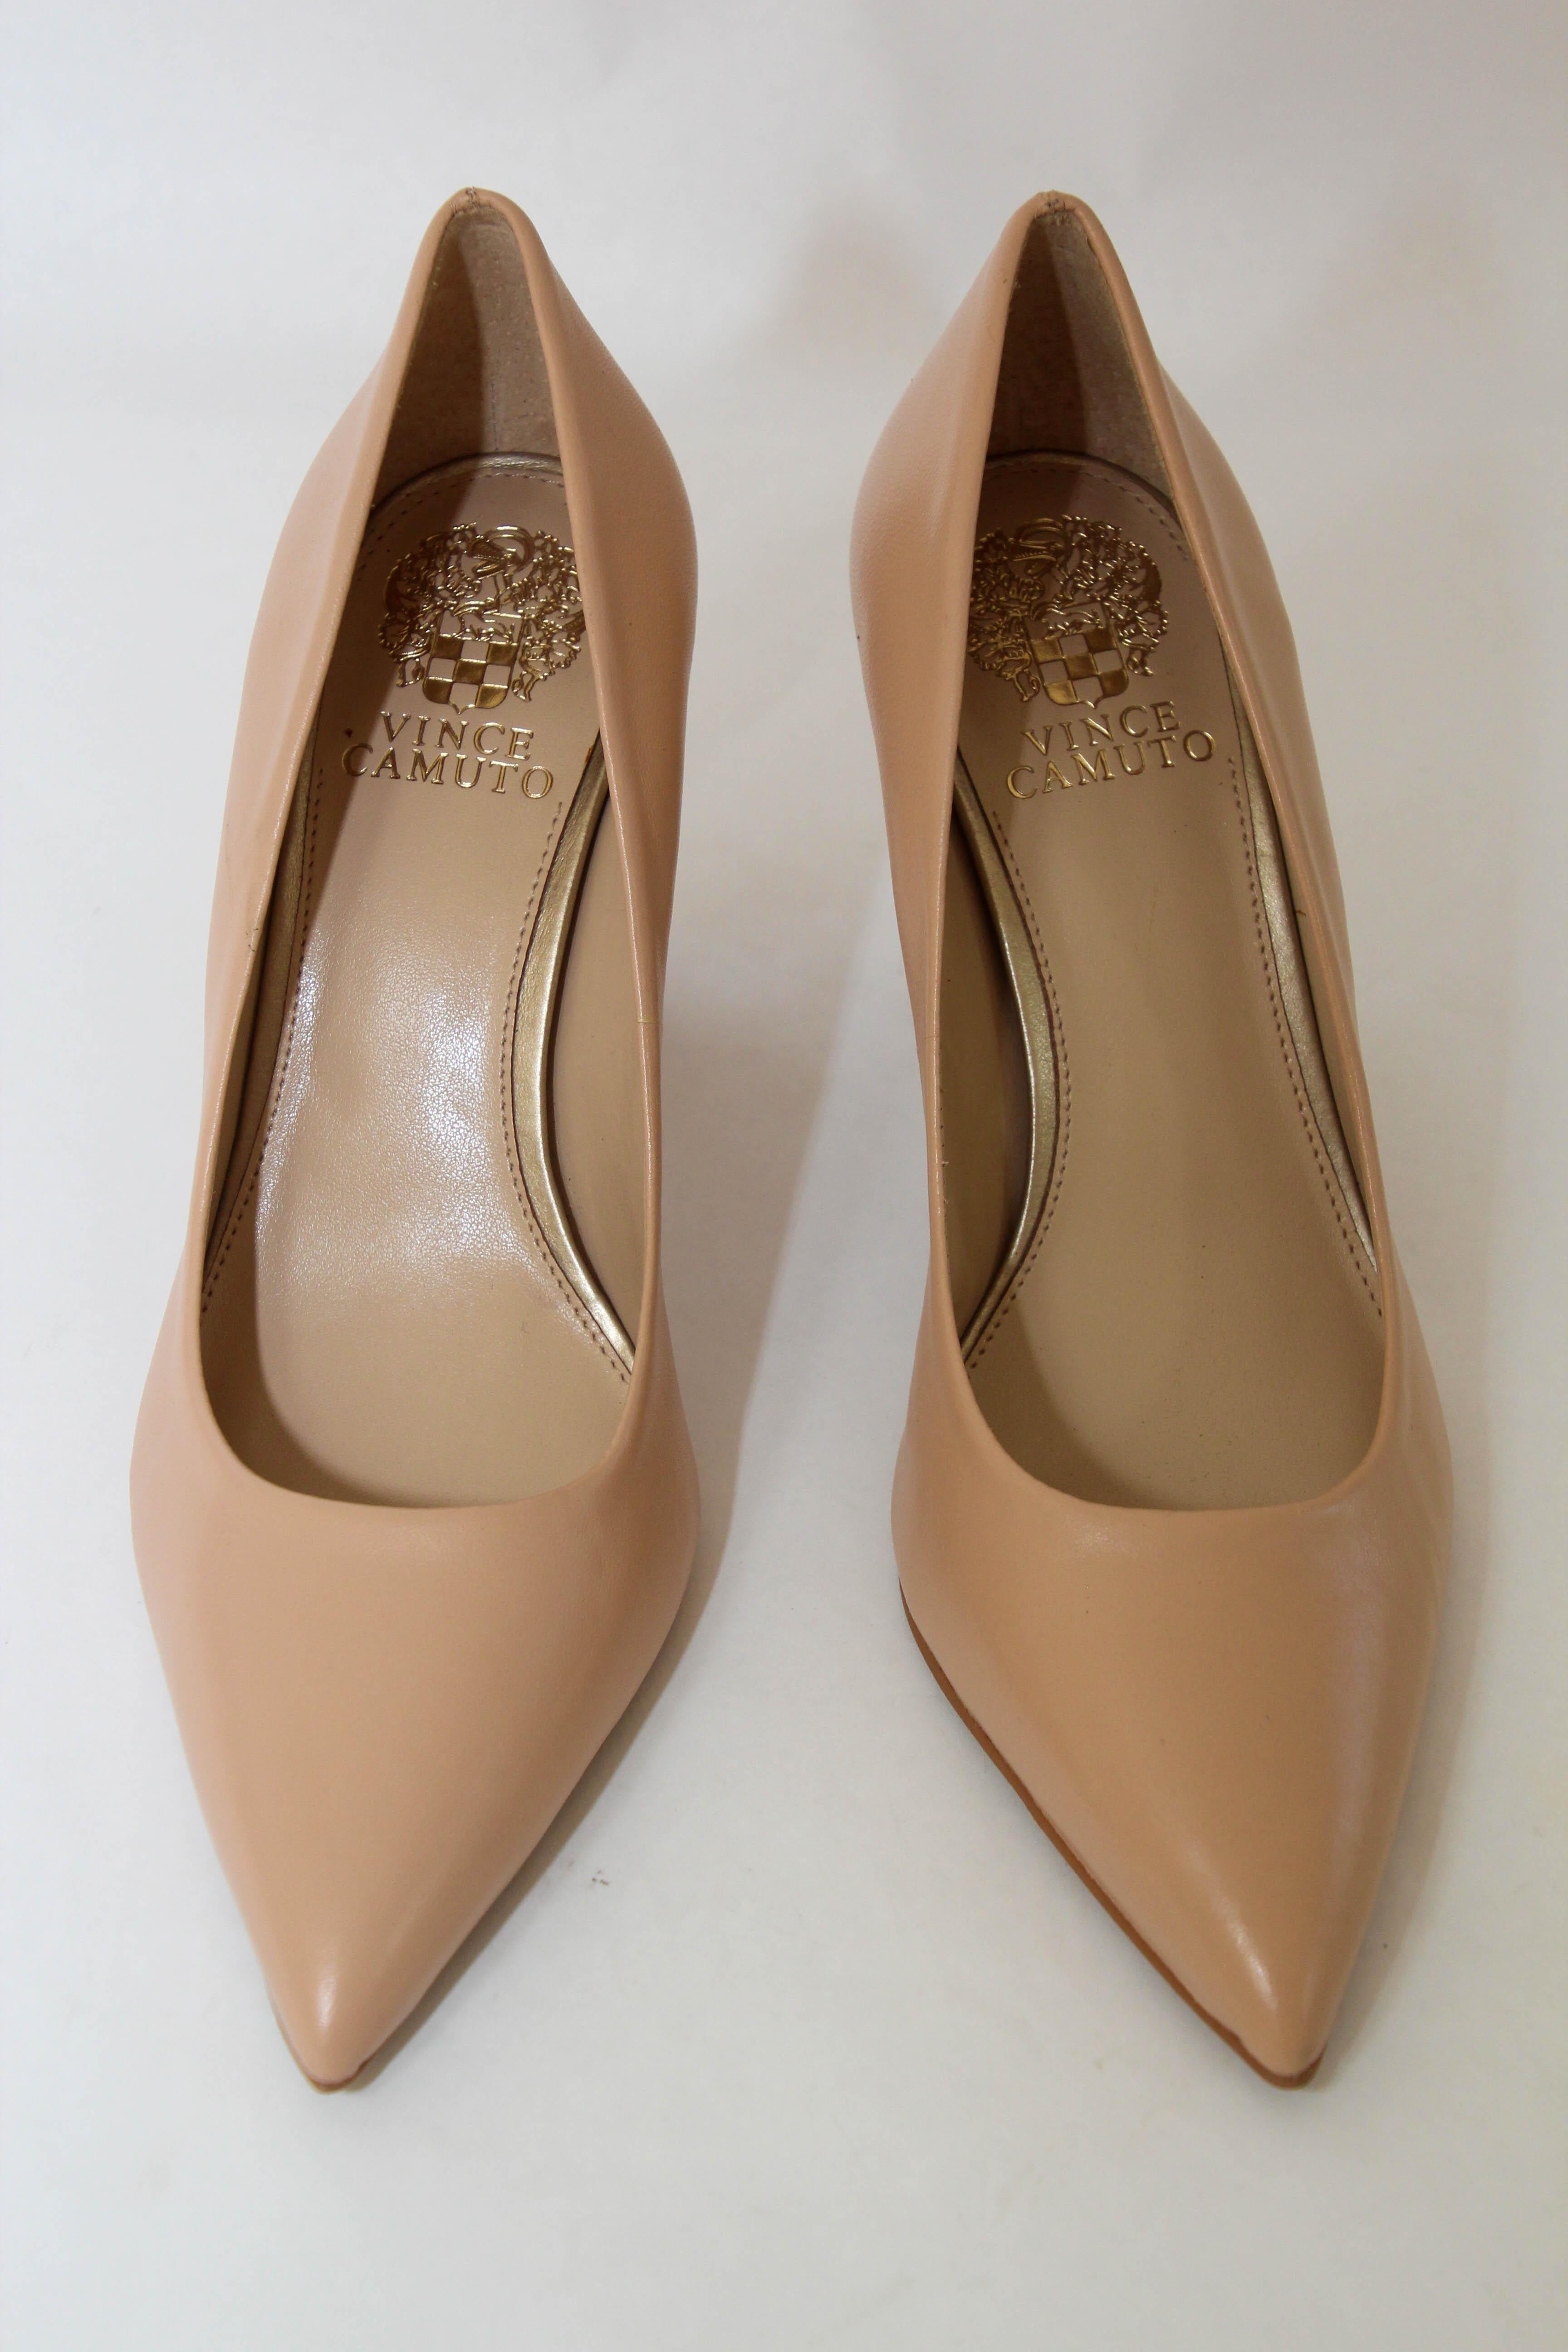 Vince Camuto Tan Leather Heel Pointed Toe Pump size 8.5  In Excellent Condition For Sale In North Hollywood, CA